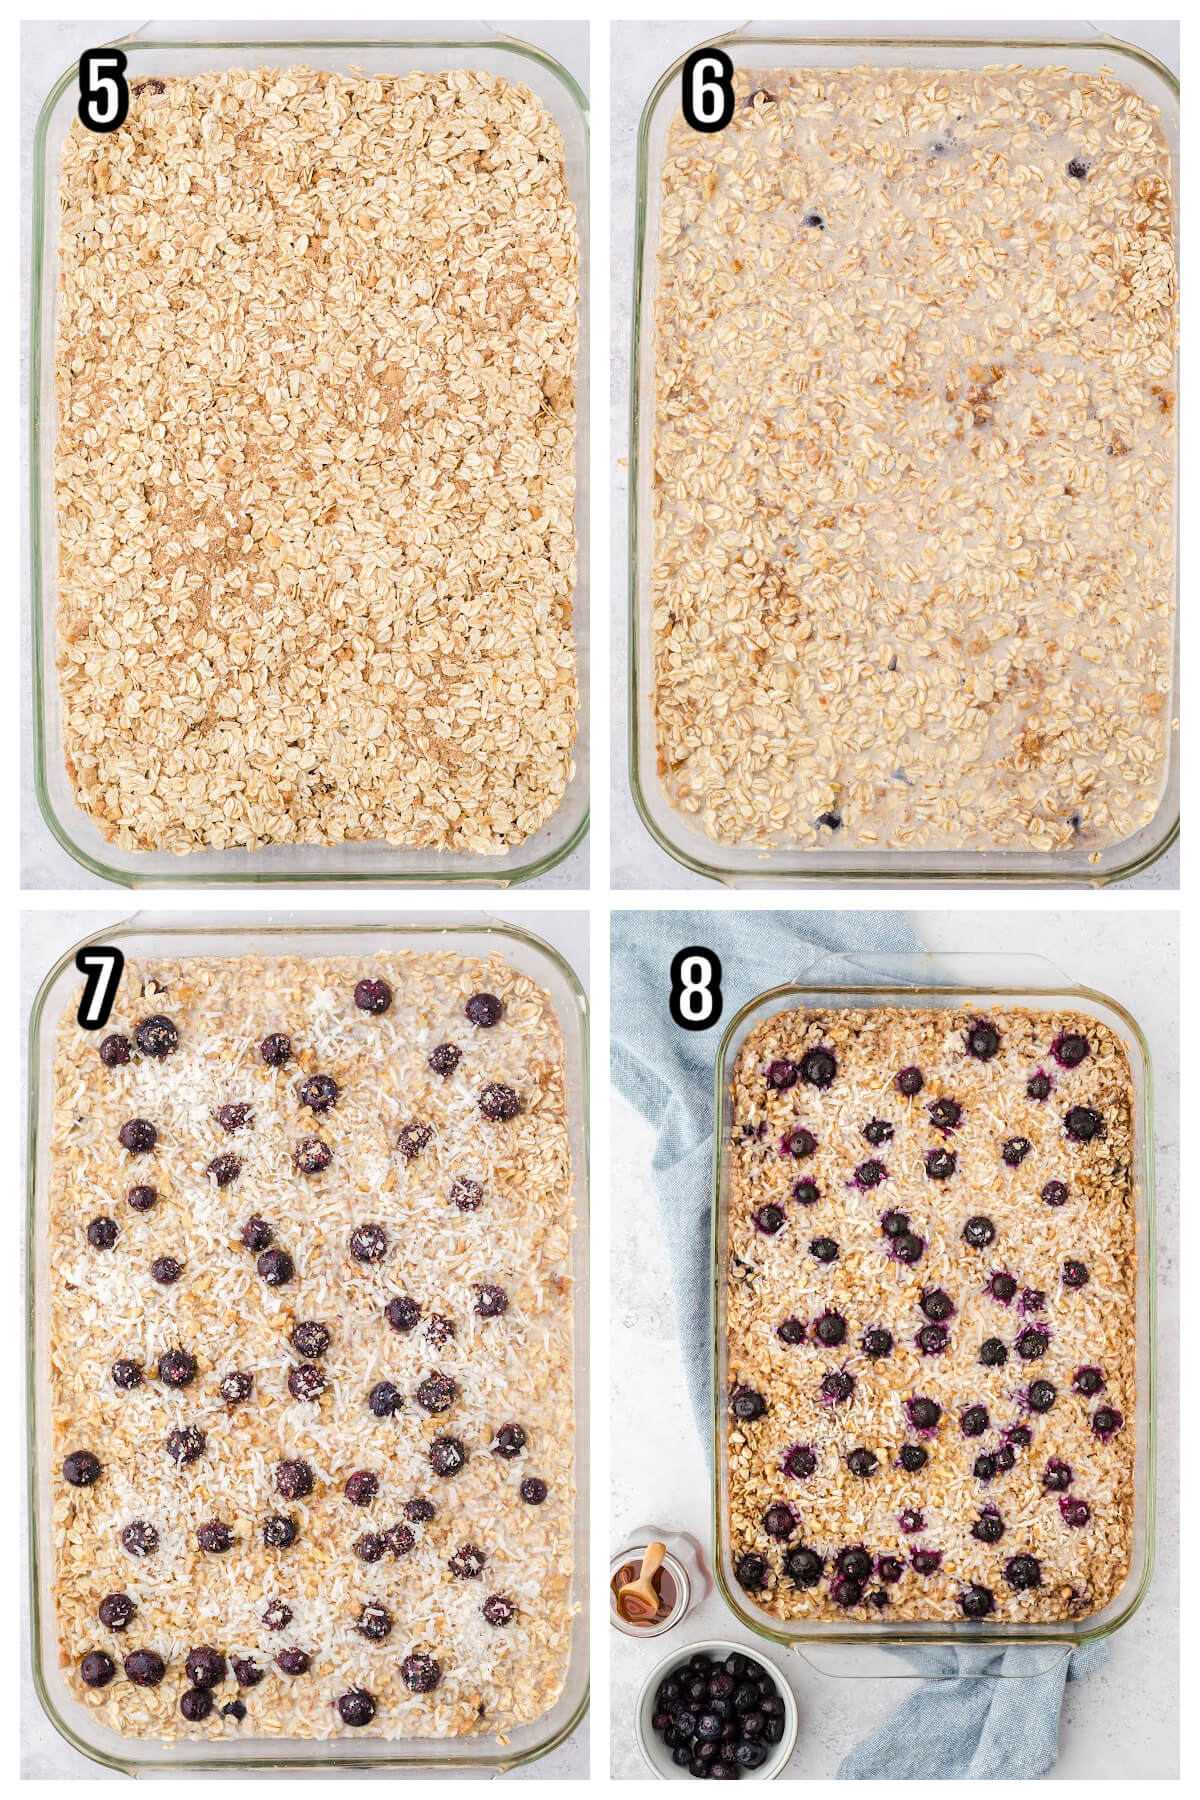 Second set of four steps to making the blueberry and banana baked oatmeal in a casserole. 